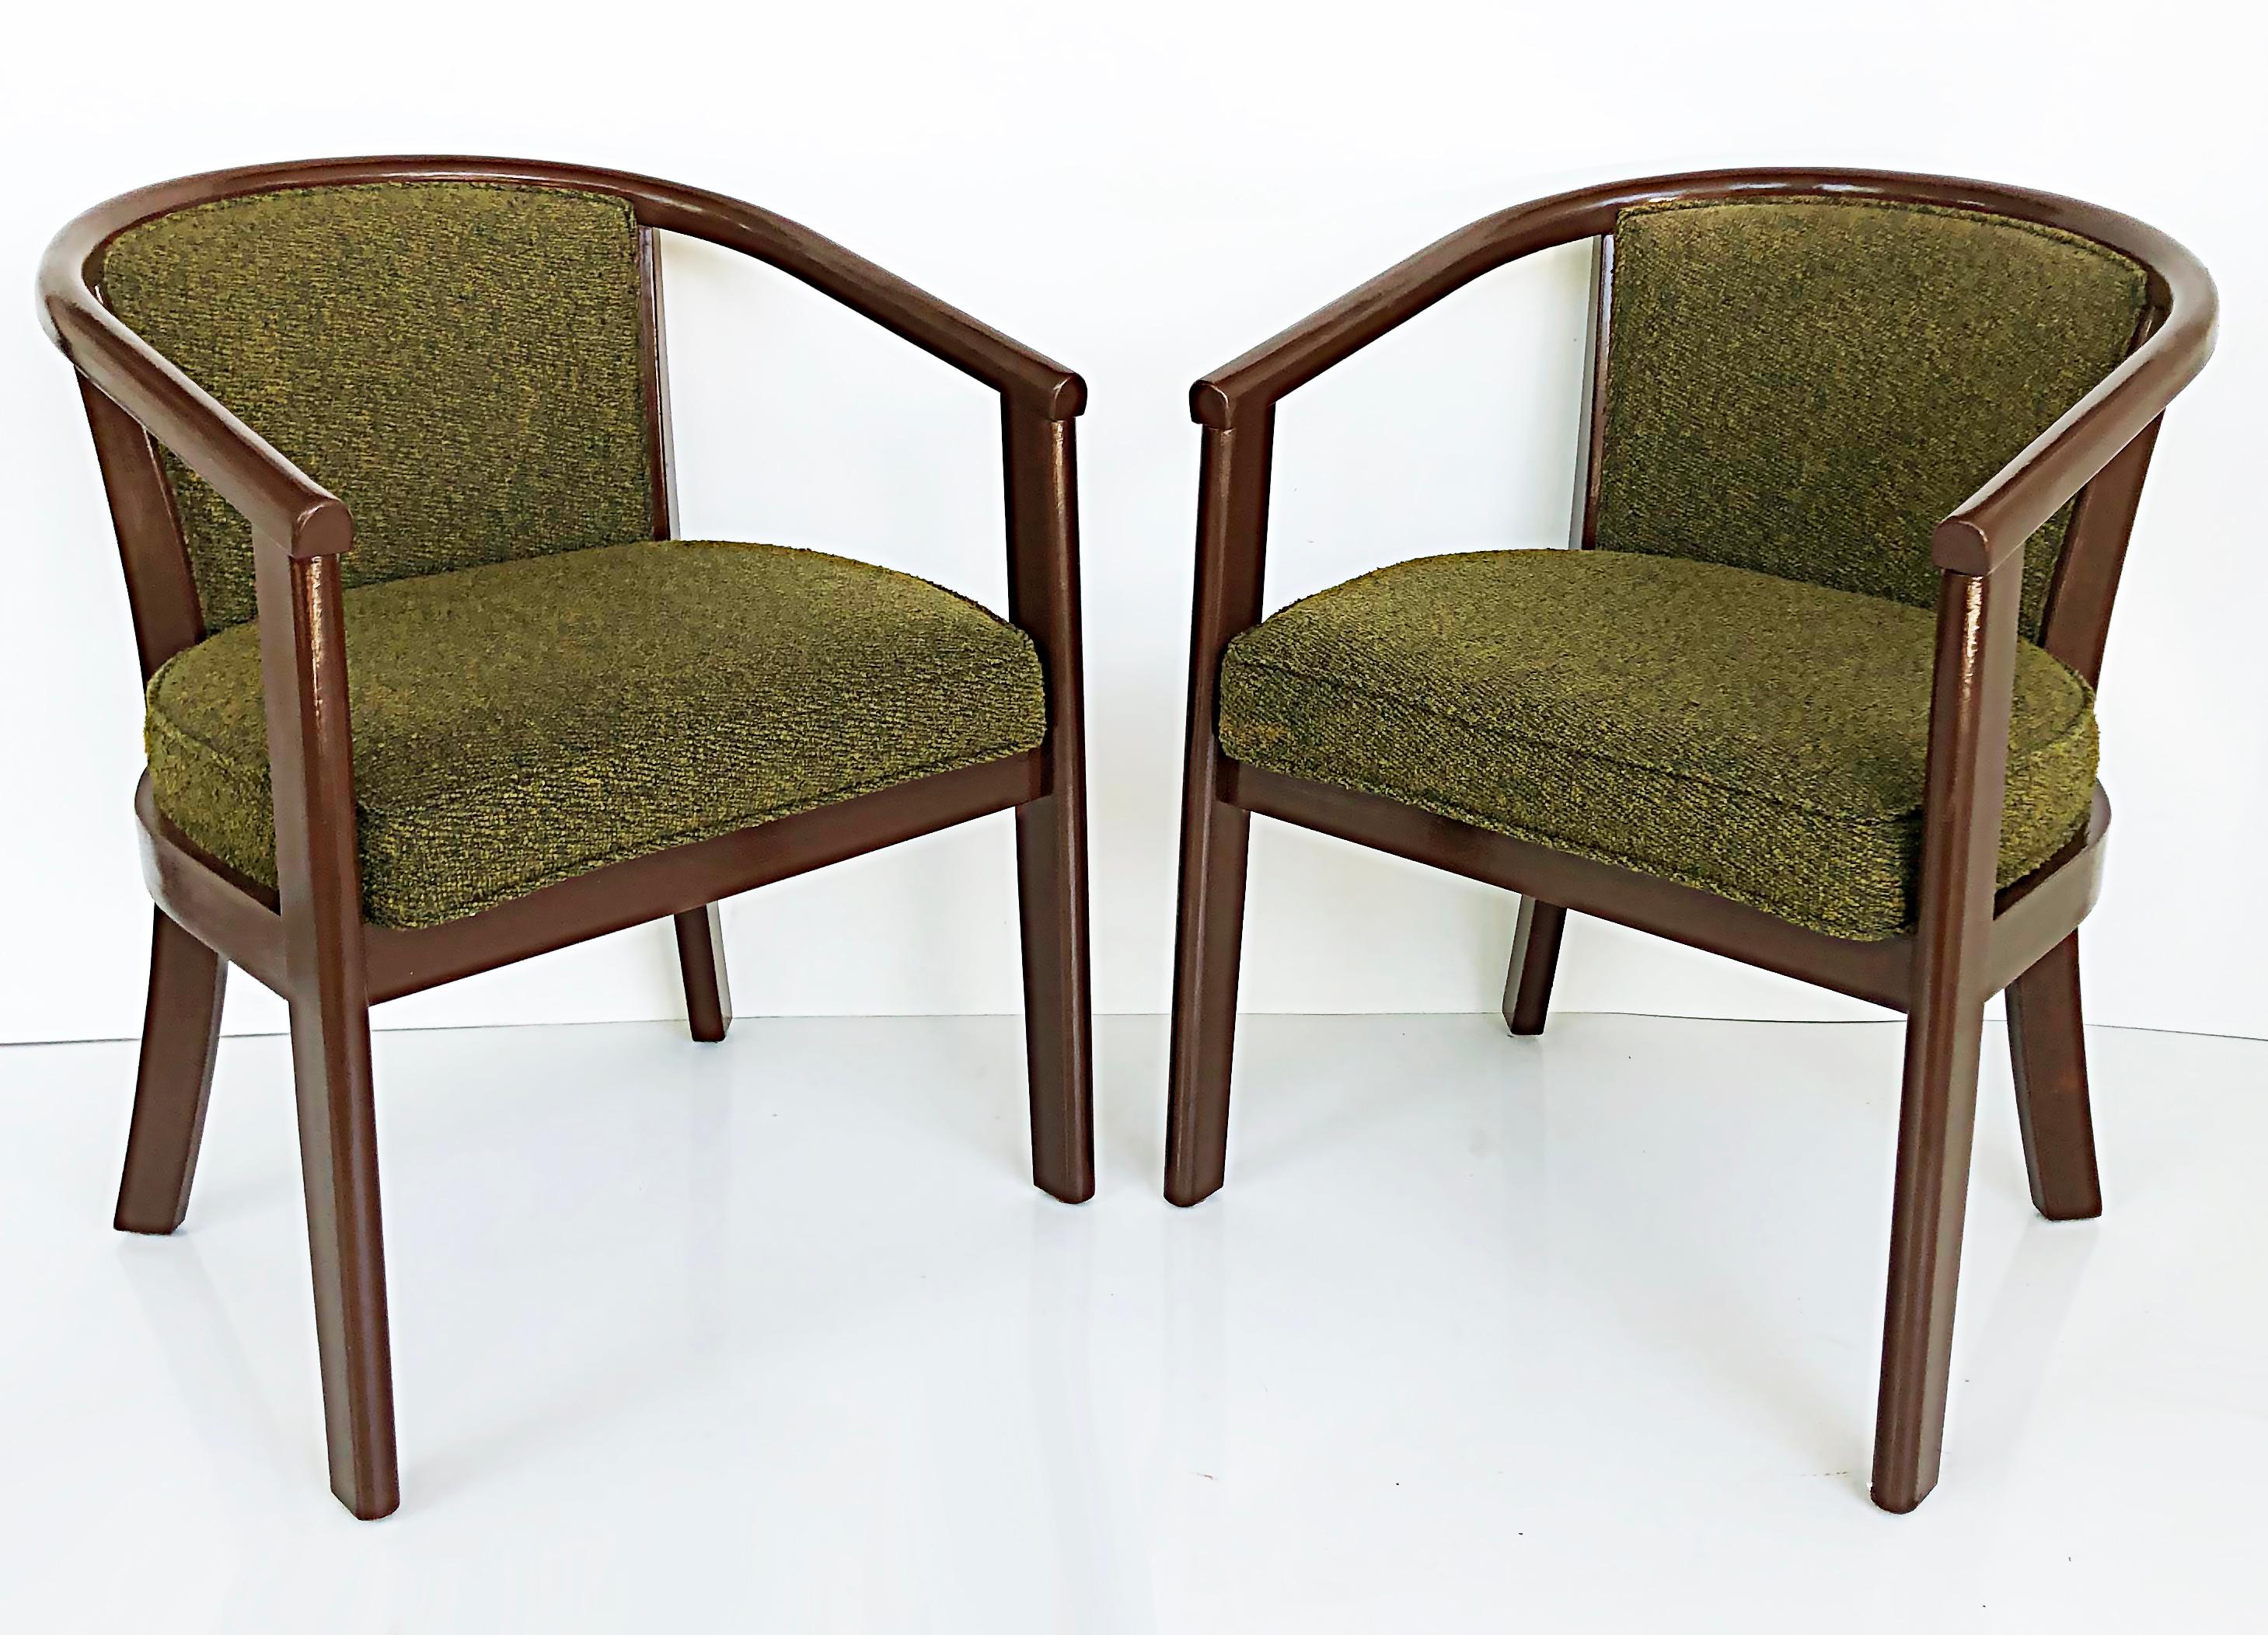 American A.C. Furniture Arlington Hotel Upholstered Armchairs, Set of 4